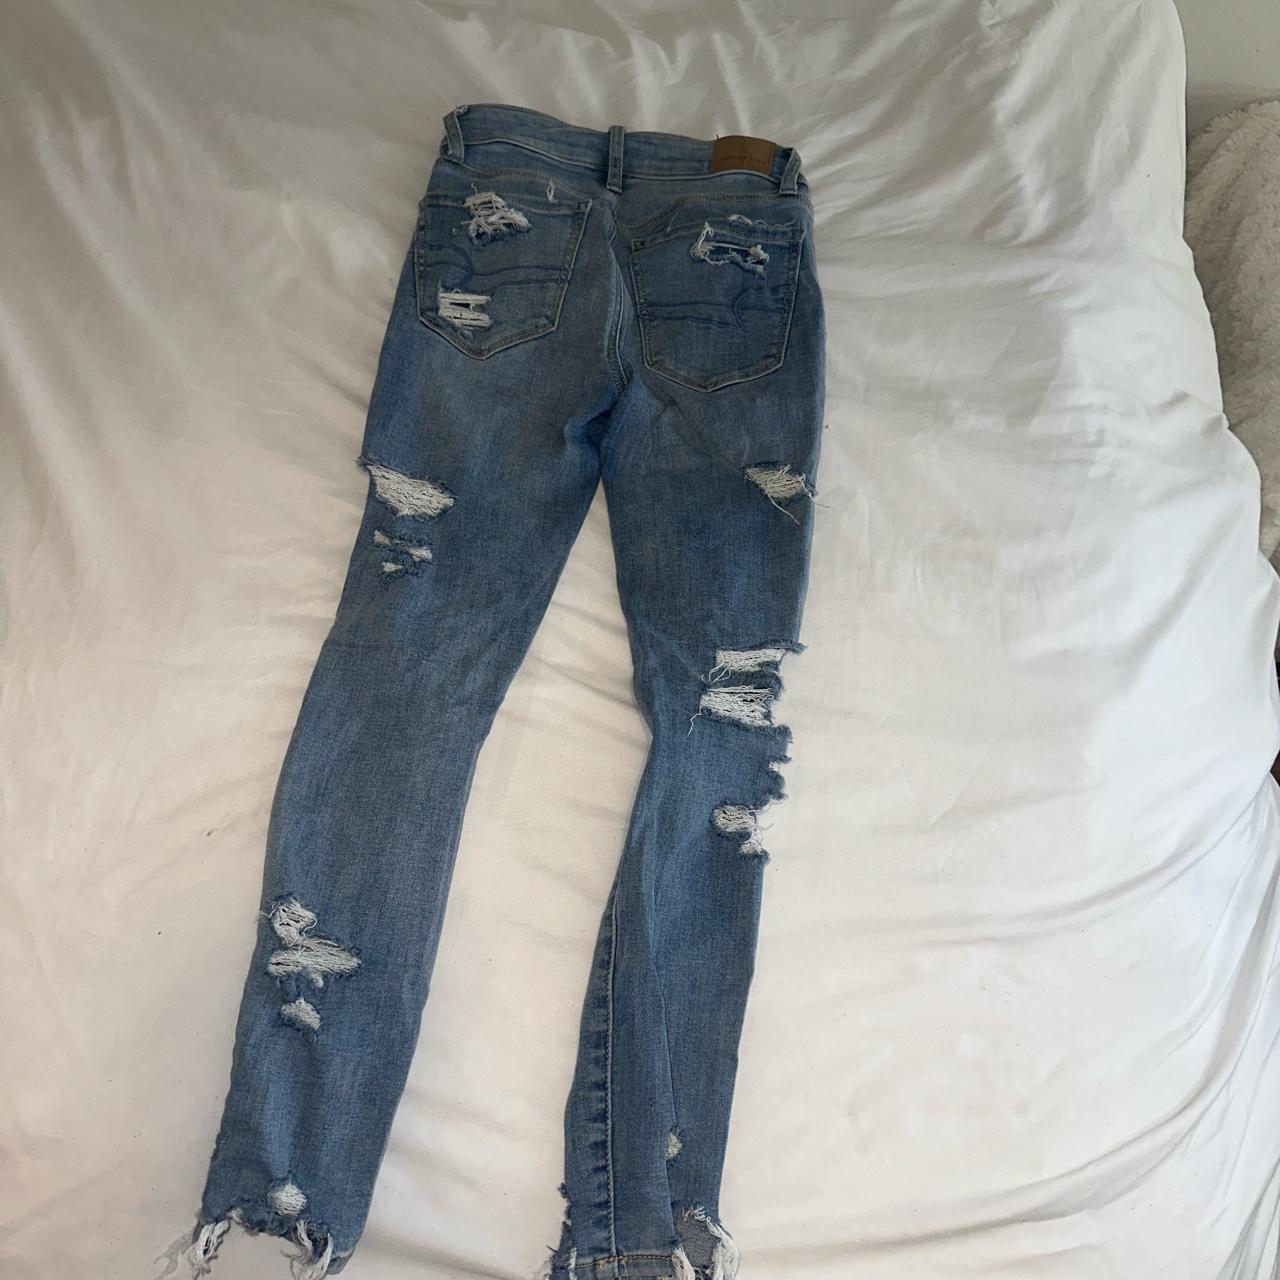 American Eagle Outfitters Women's Blue and White Jeans | Depop